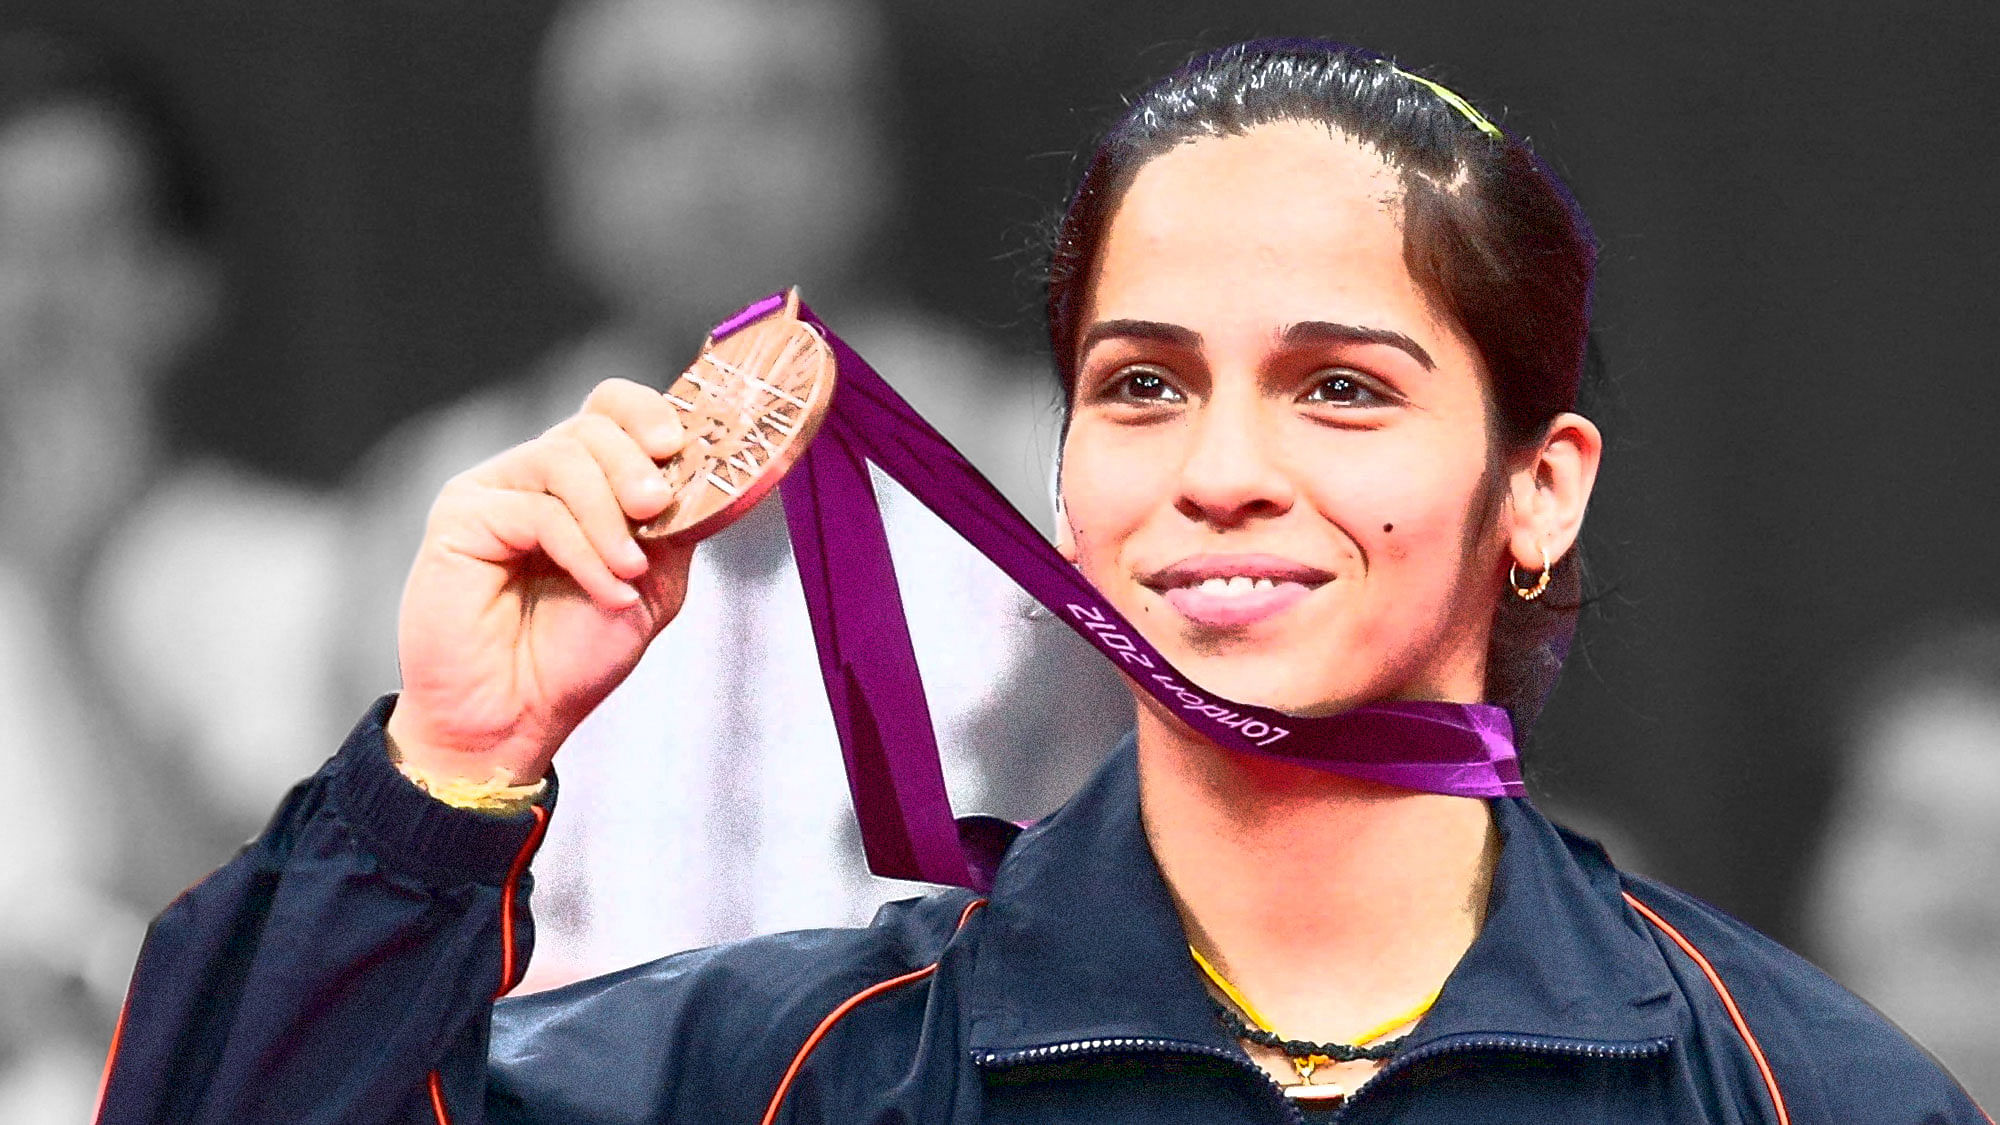 Saina Nehwal with her Bronze medal from the 2012 London Olympics. (Photo: Reuters)